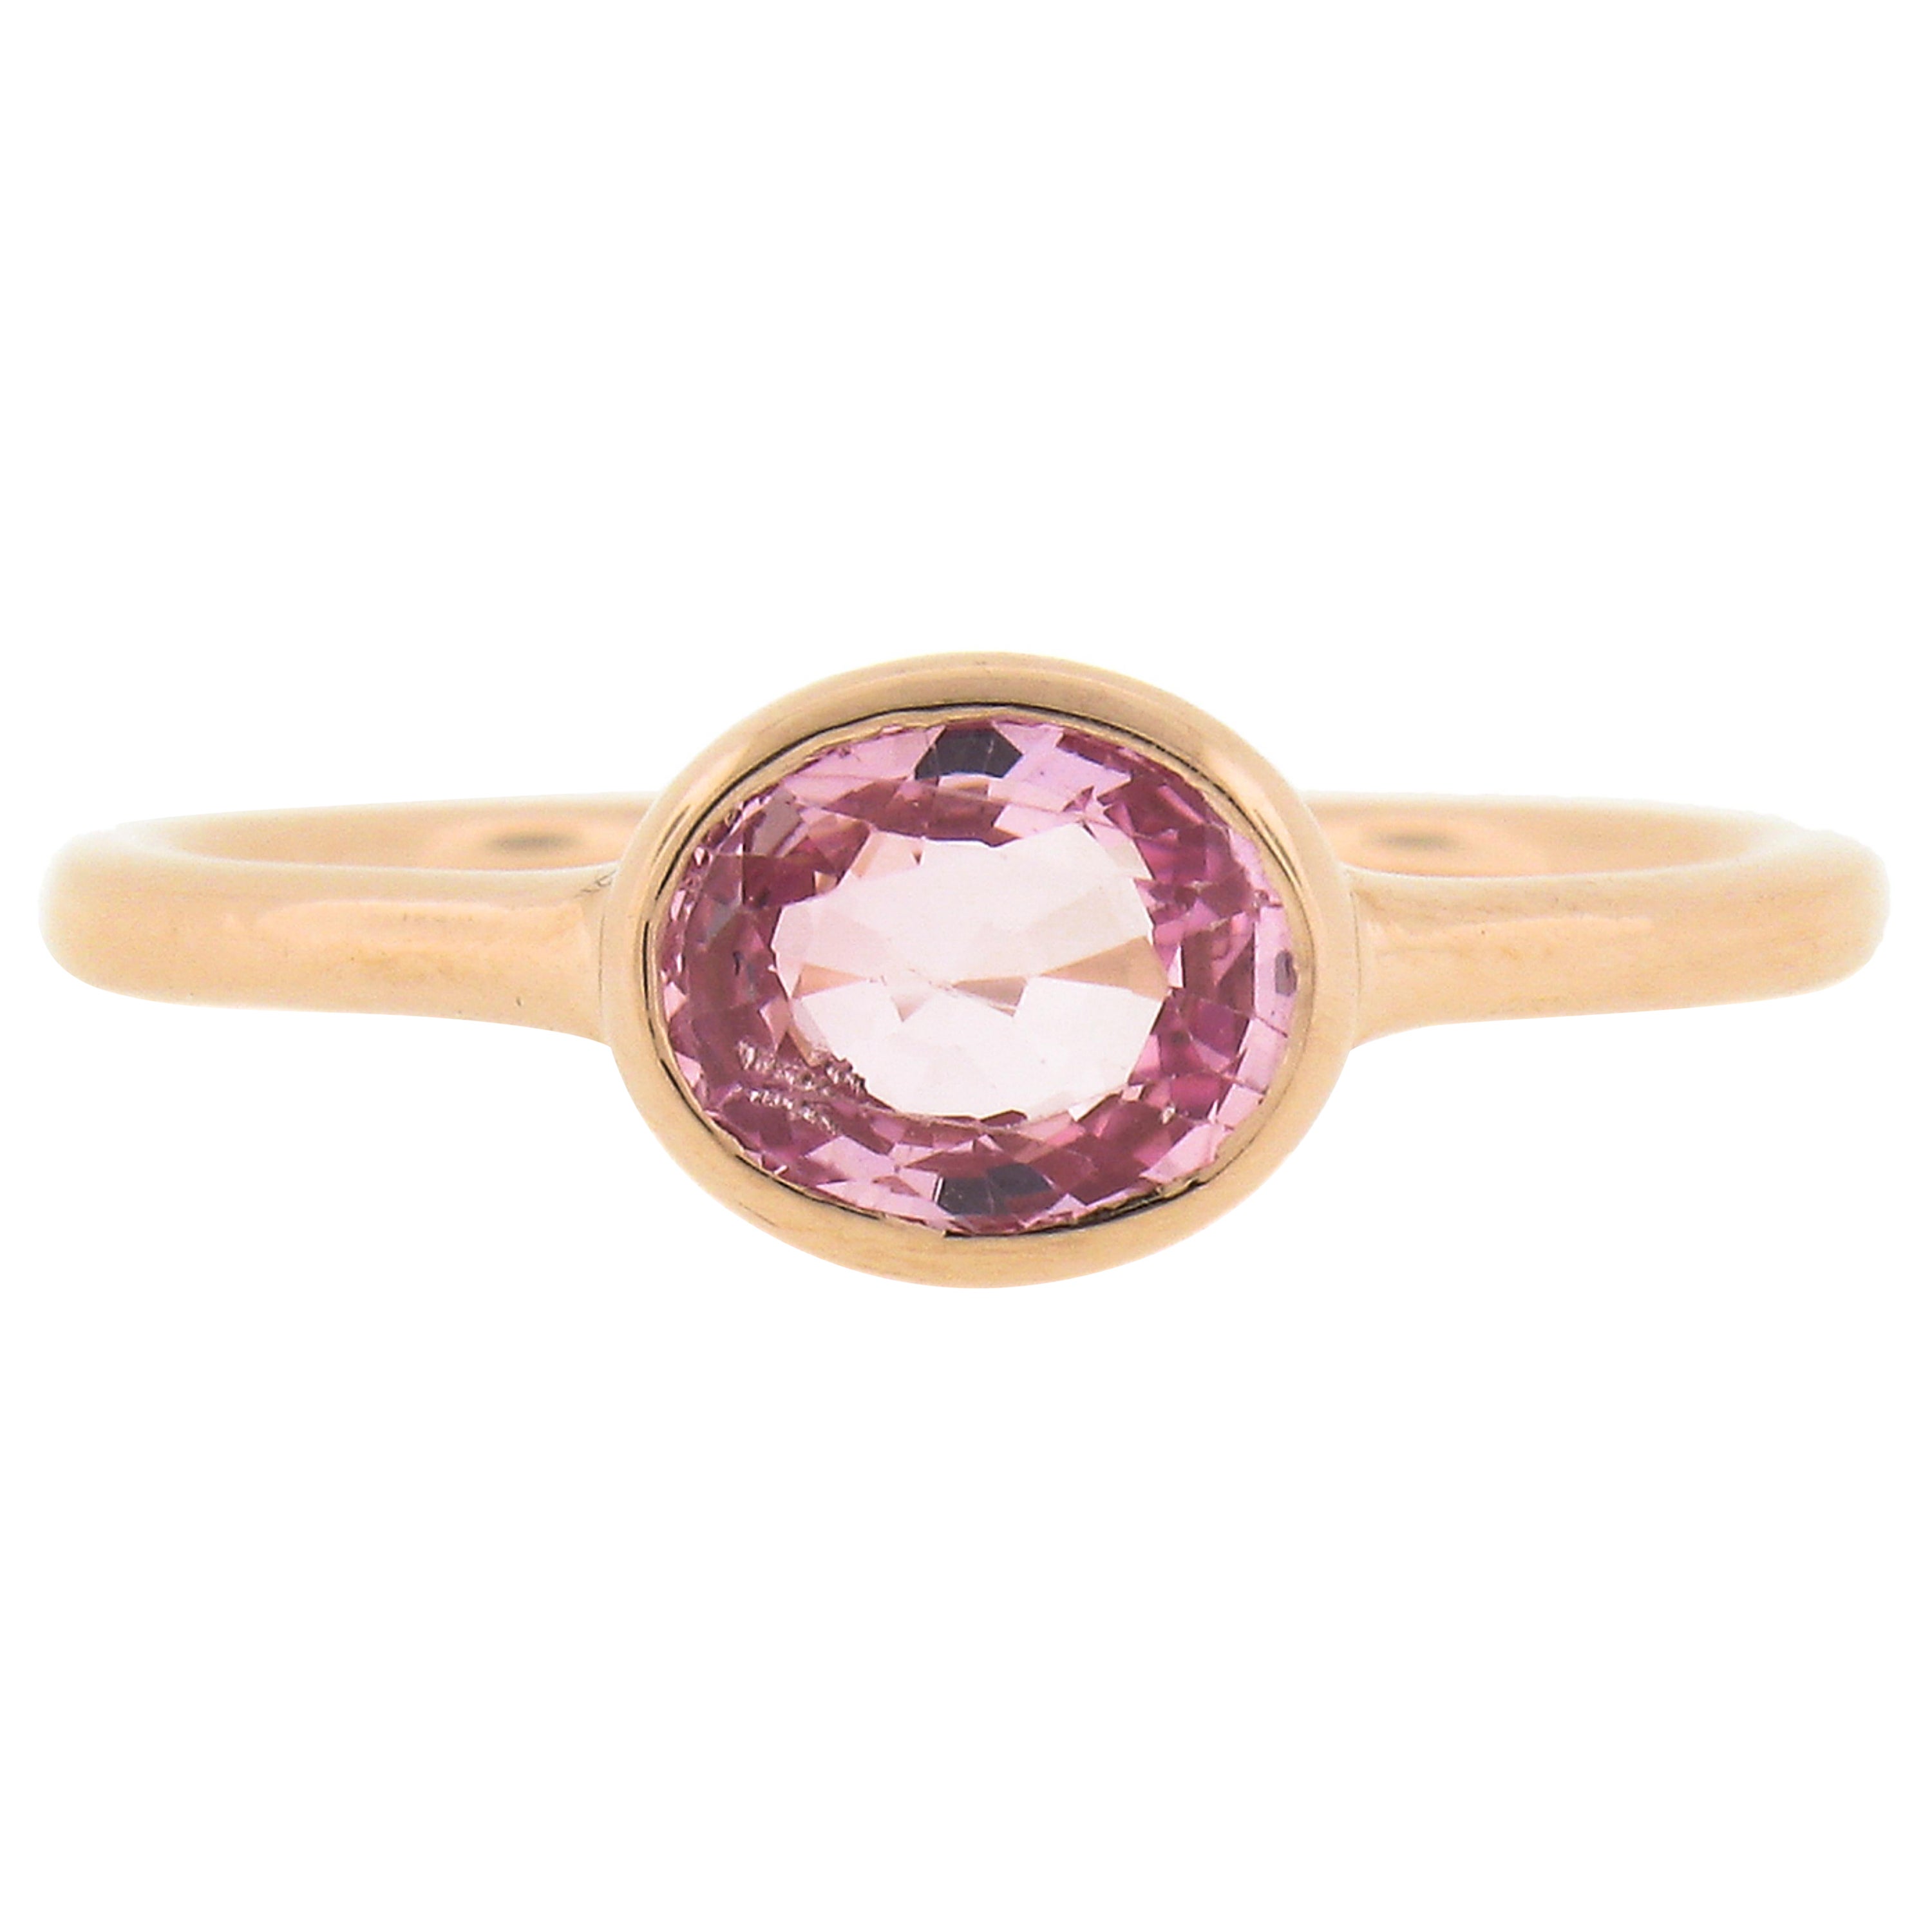 NEW 14k Rose Gold 1.29ctw GIA Oval Orangy Pink Sapphire Bezel Solitaire Ring